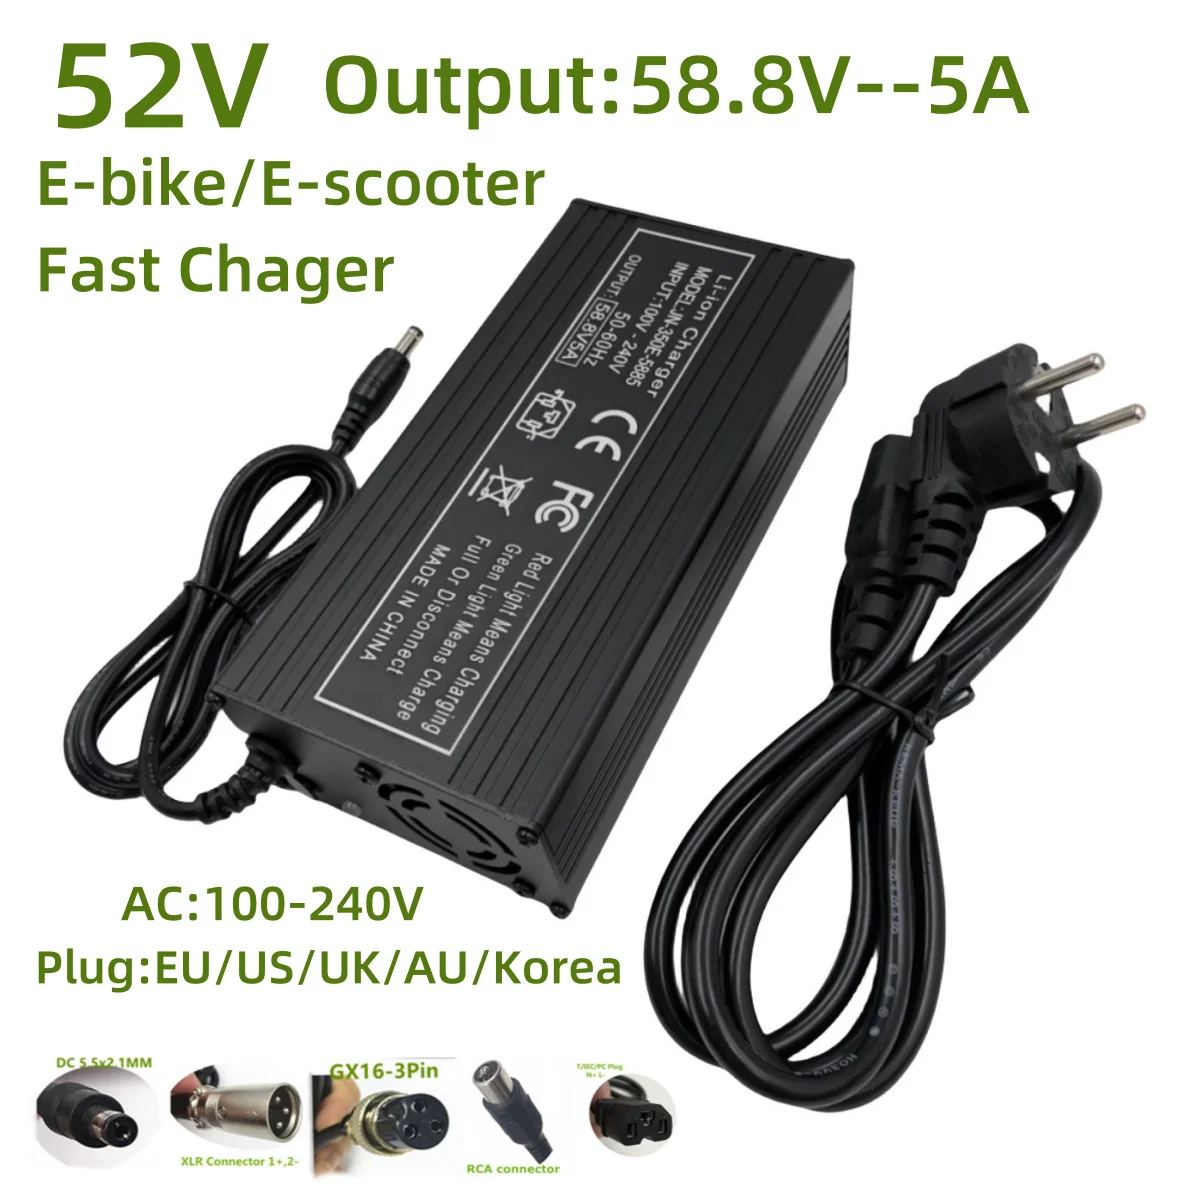 

58.8V5A Battery Charger For 14S 52V/48V Li-ion Battery electric bike lithium battery Strong with cooling fan fast charger